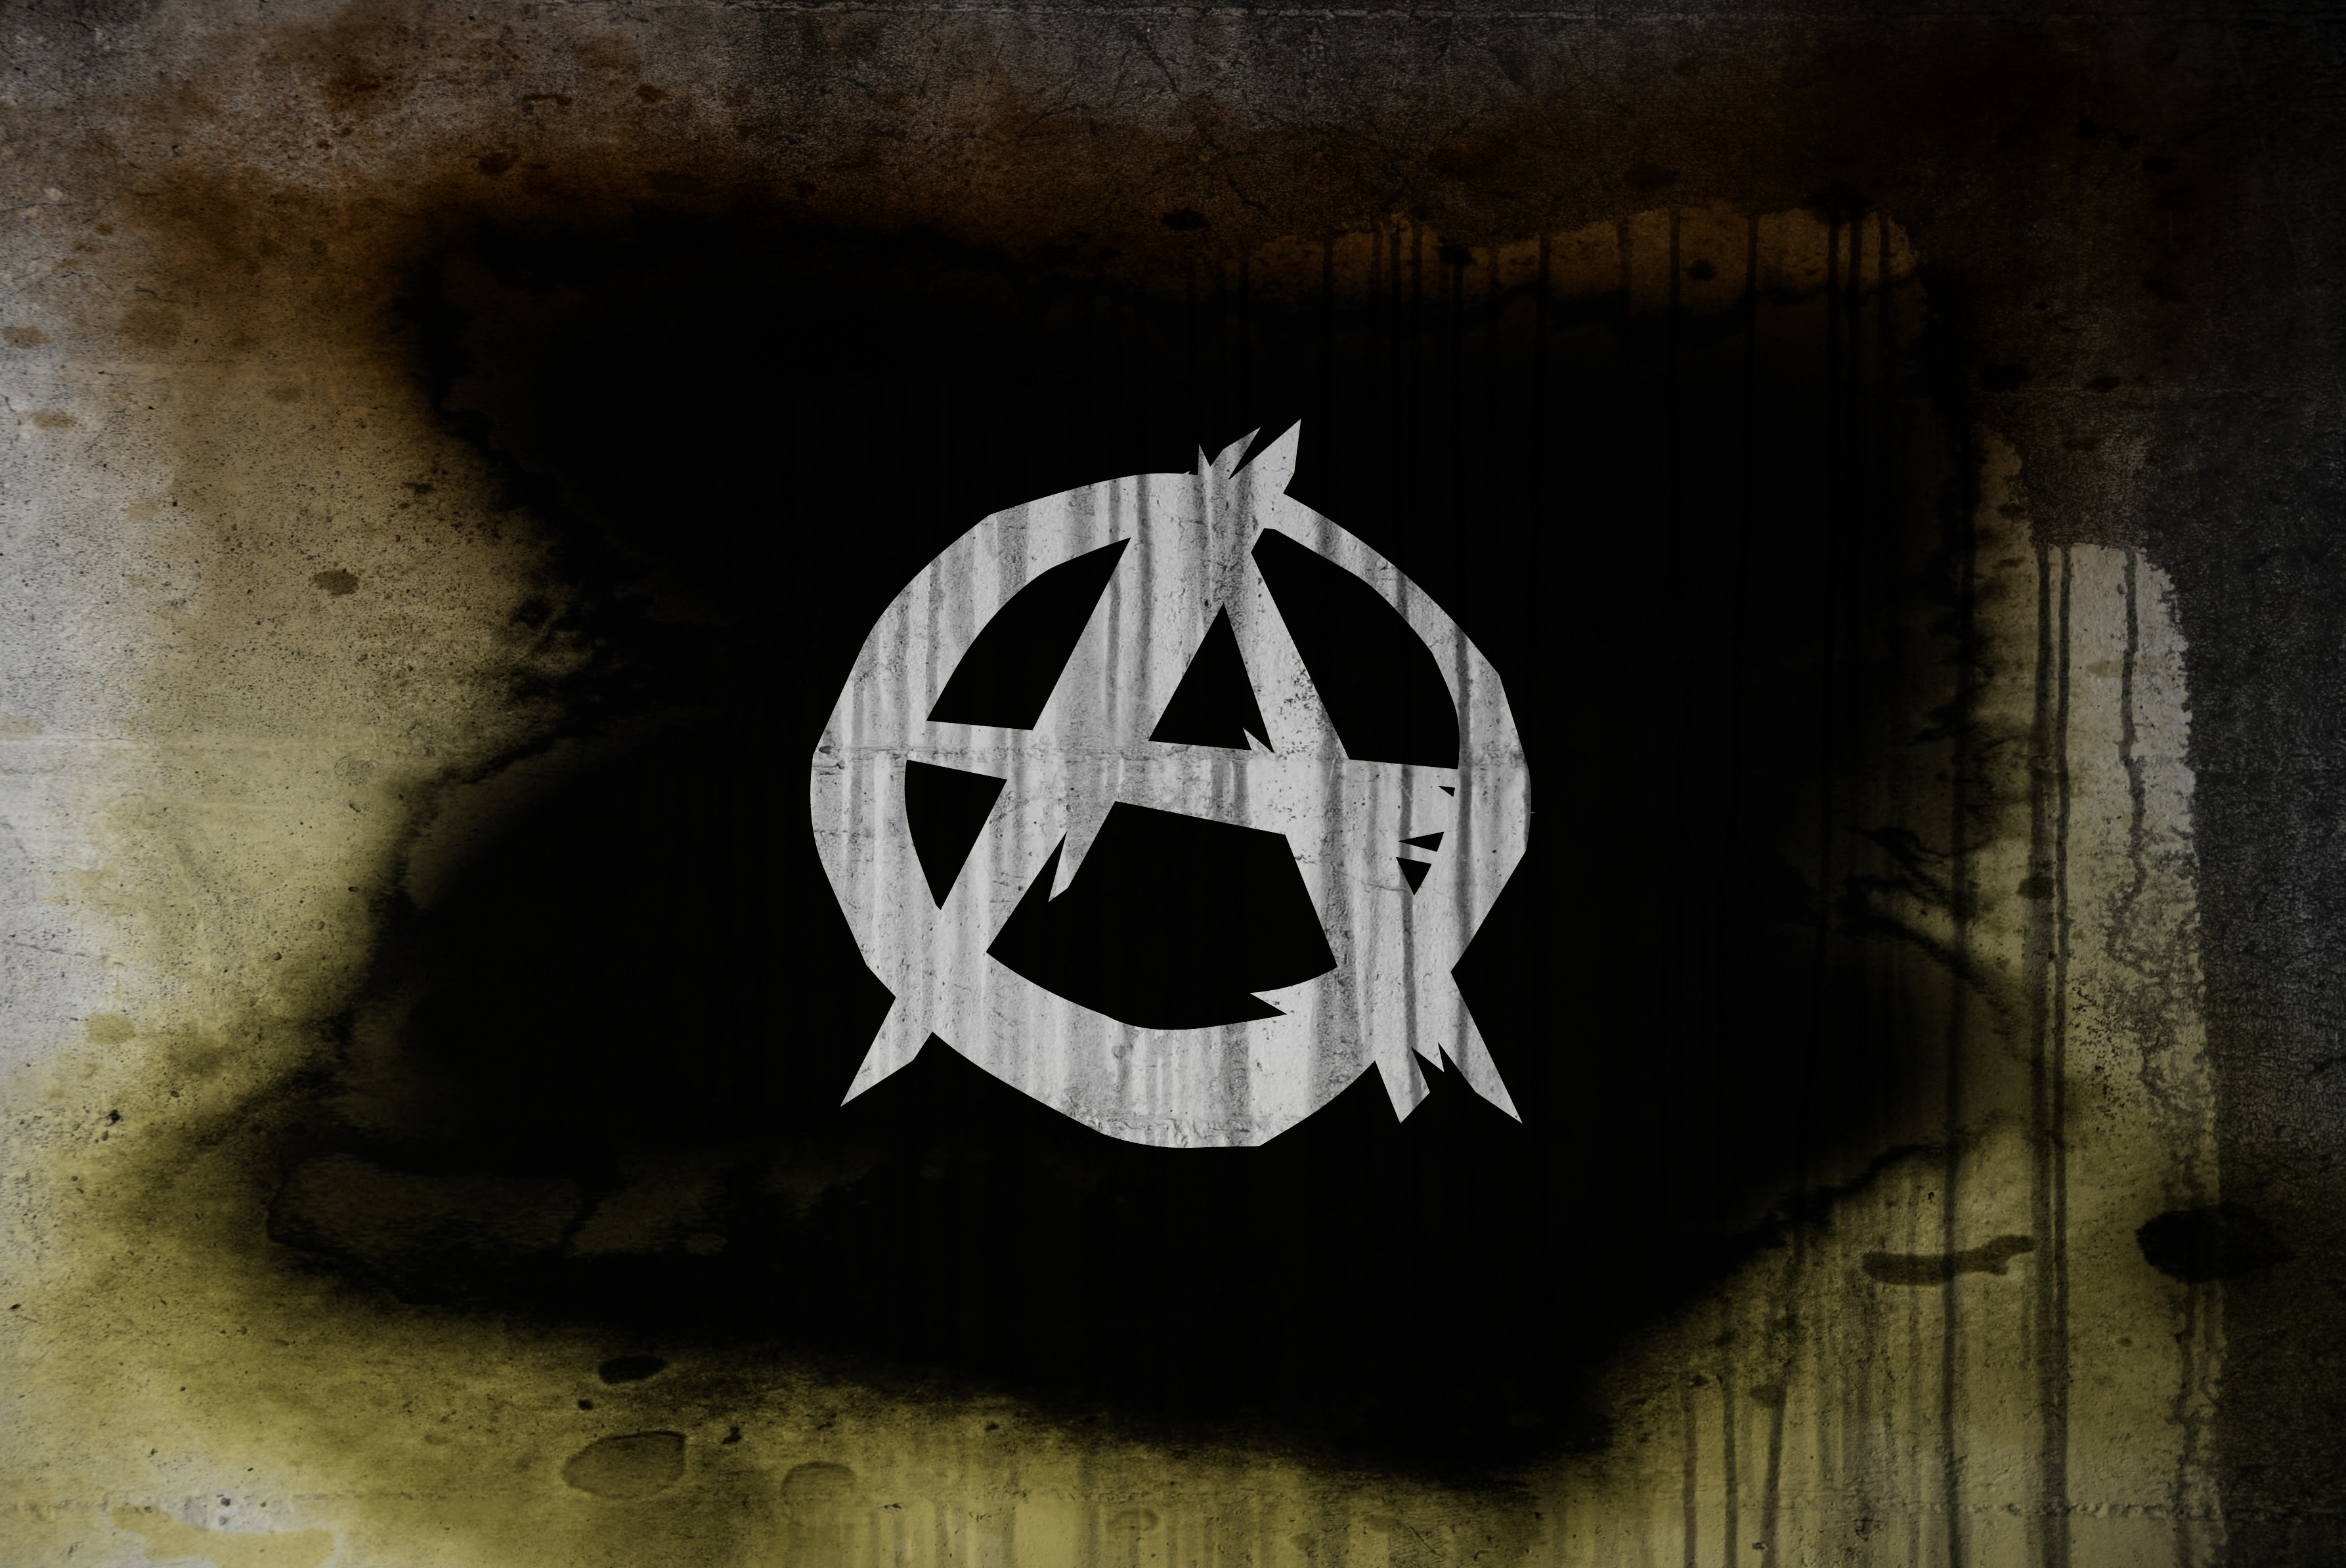 Anarchy HD Wallpaper Background Image